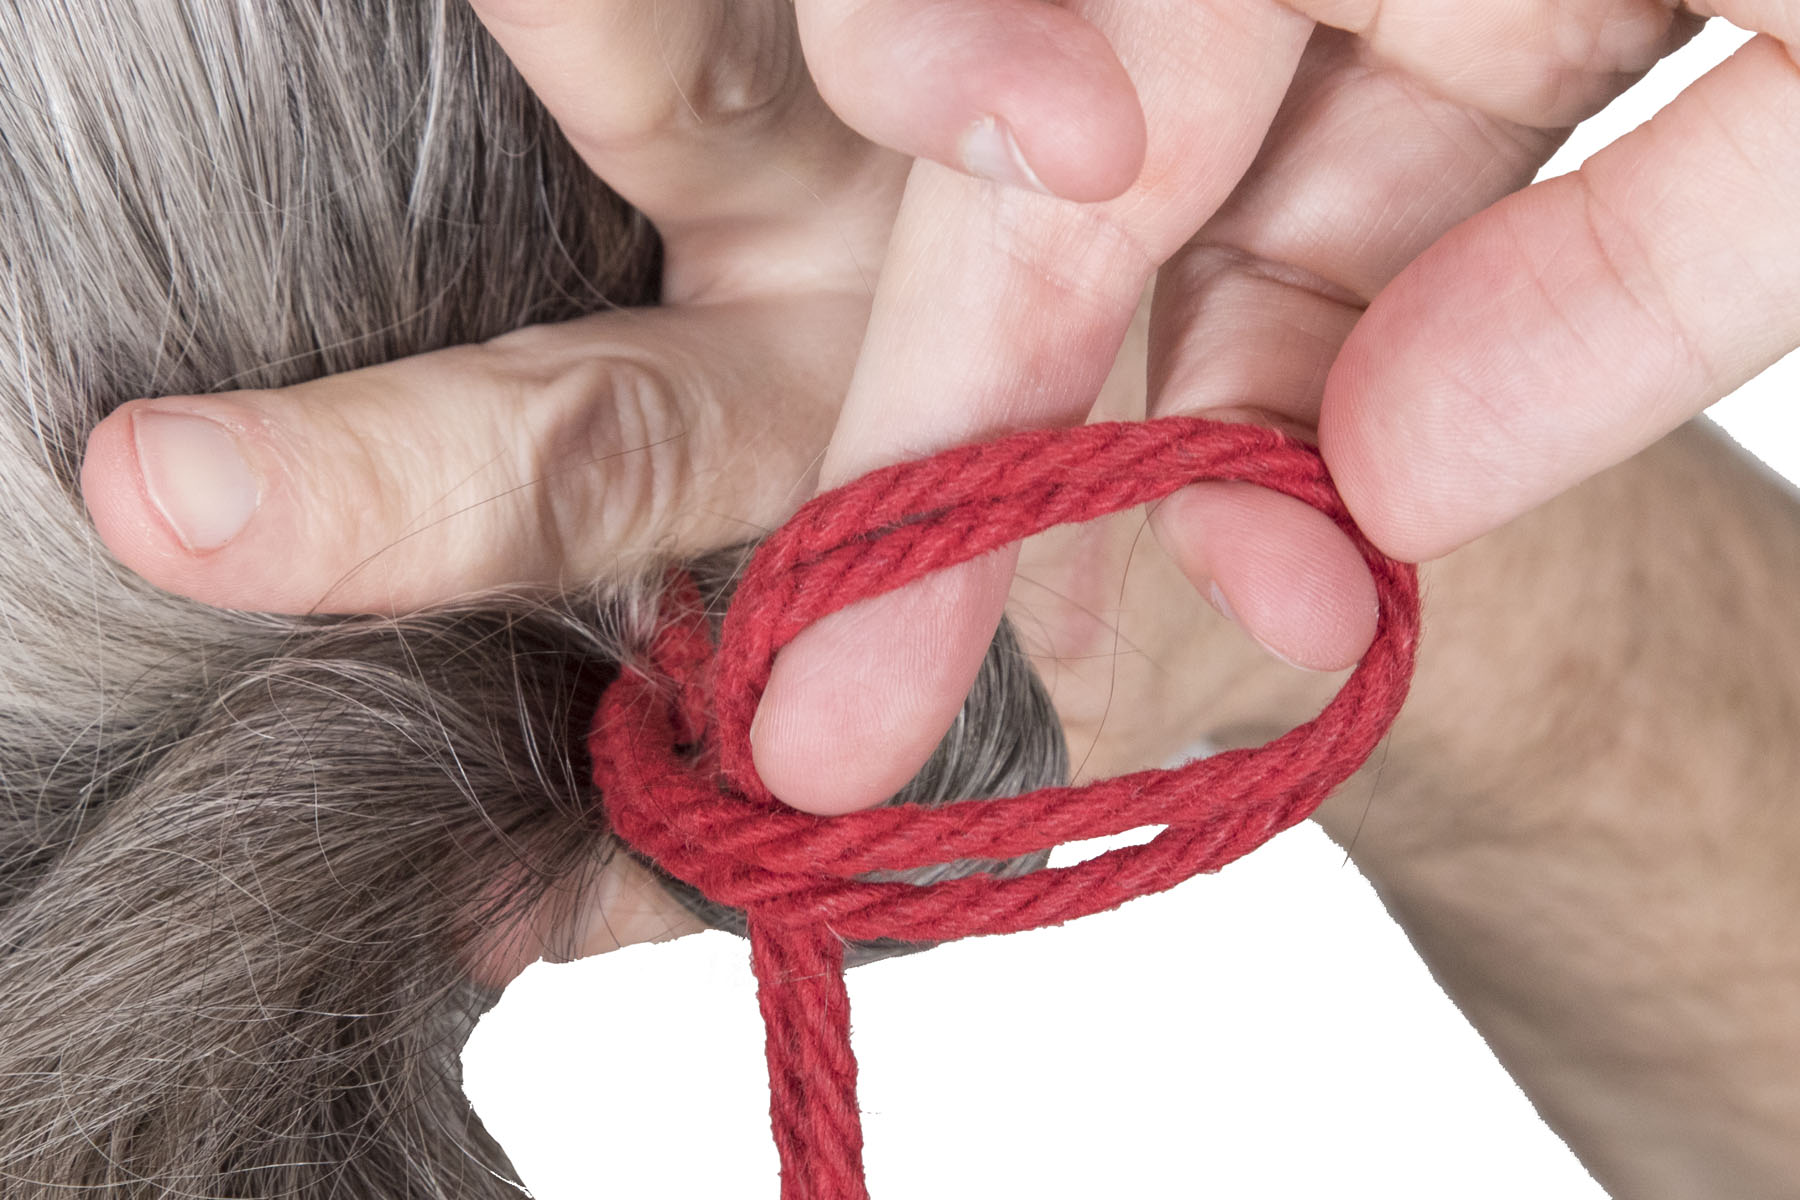 While holding the tie in place with their left hand, the rigger has flipped over a loop of the standing end of the rope. They are about to slide the loop over the U shape in the ponytail and the lark’s head. The flipped loop technique is a fast way to tie a half hitch around the existing tie.